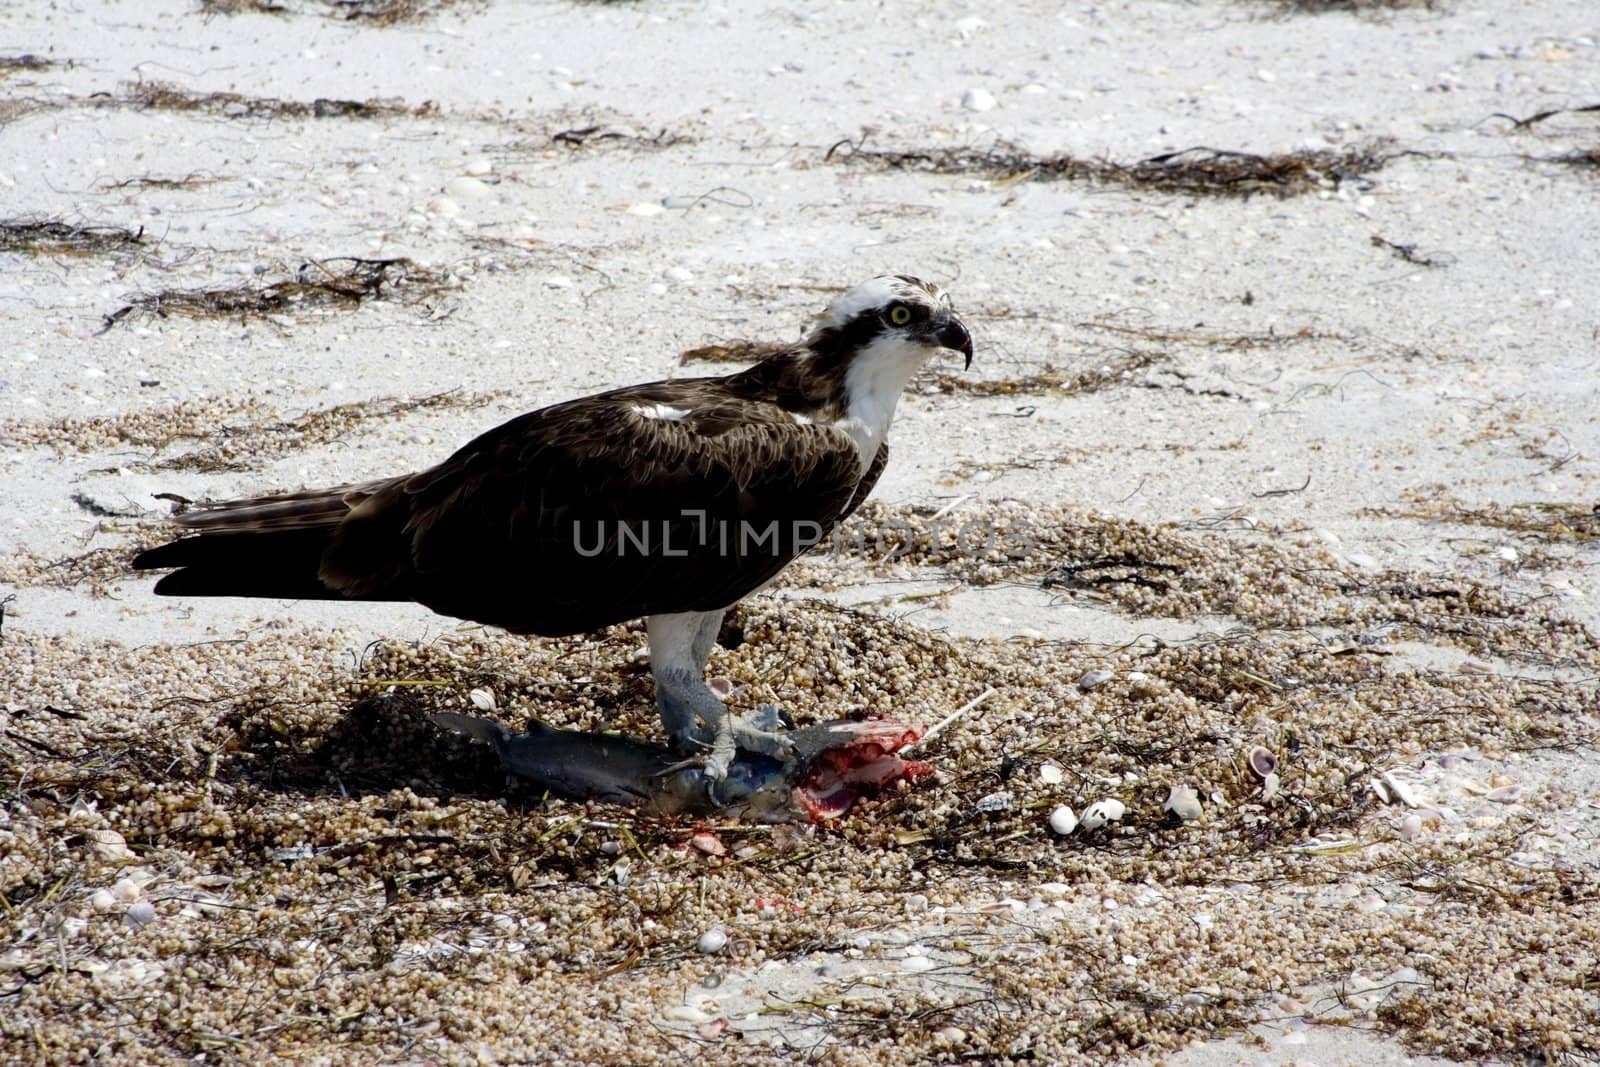 osprey enjoying his lunch after just catching a fish